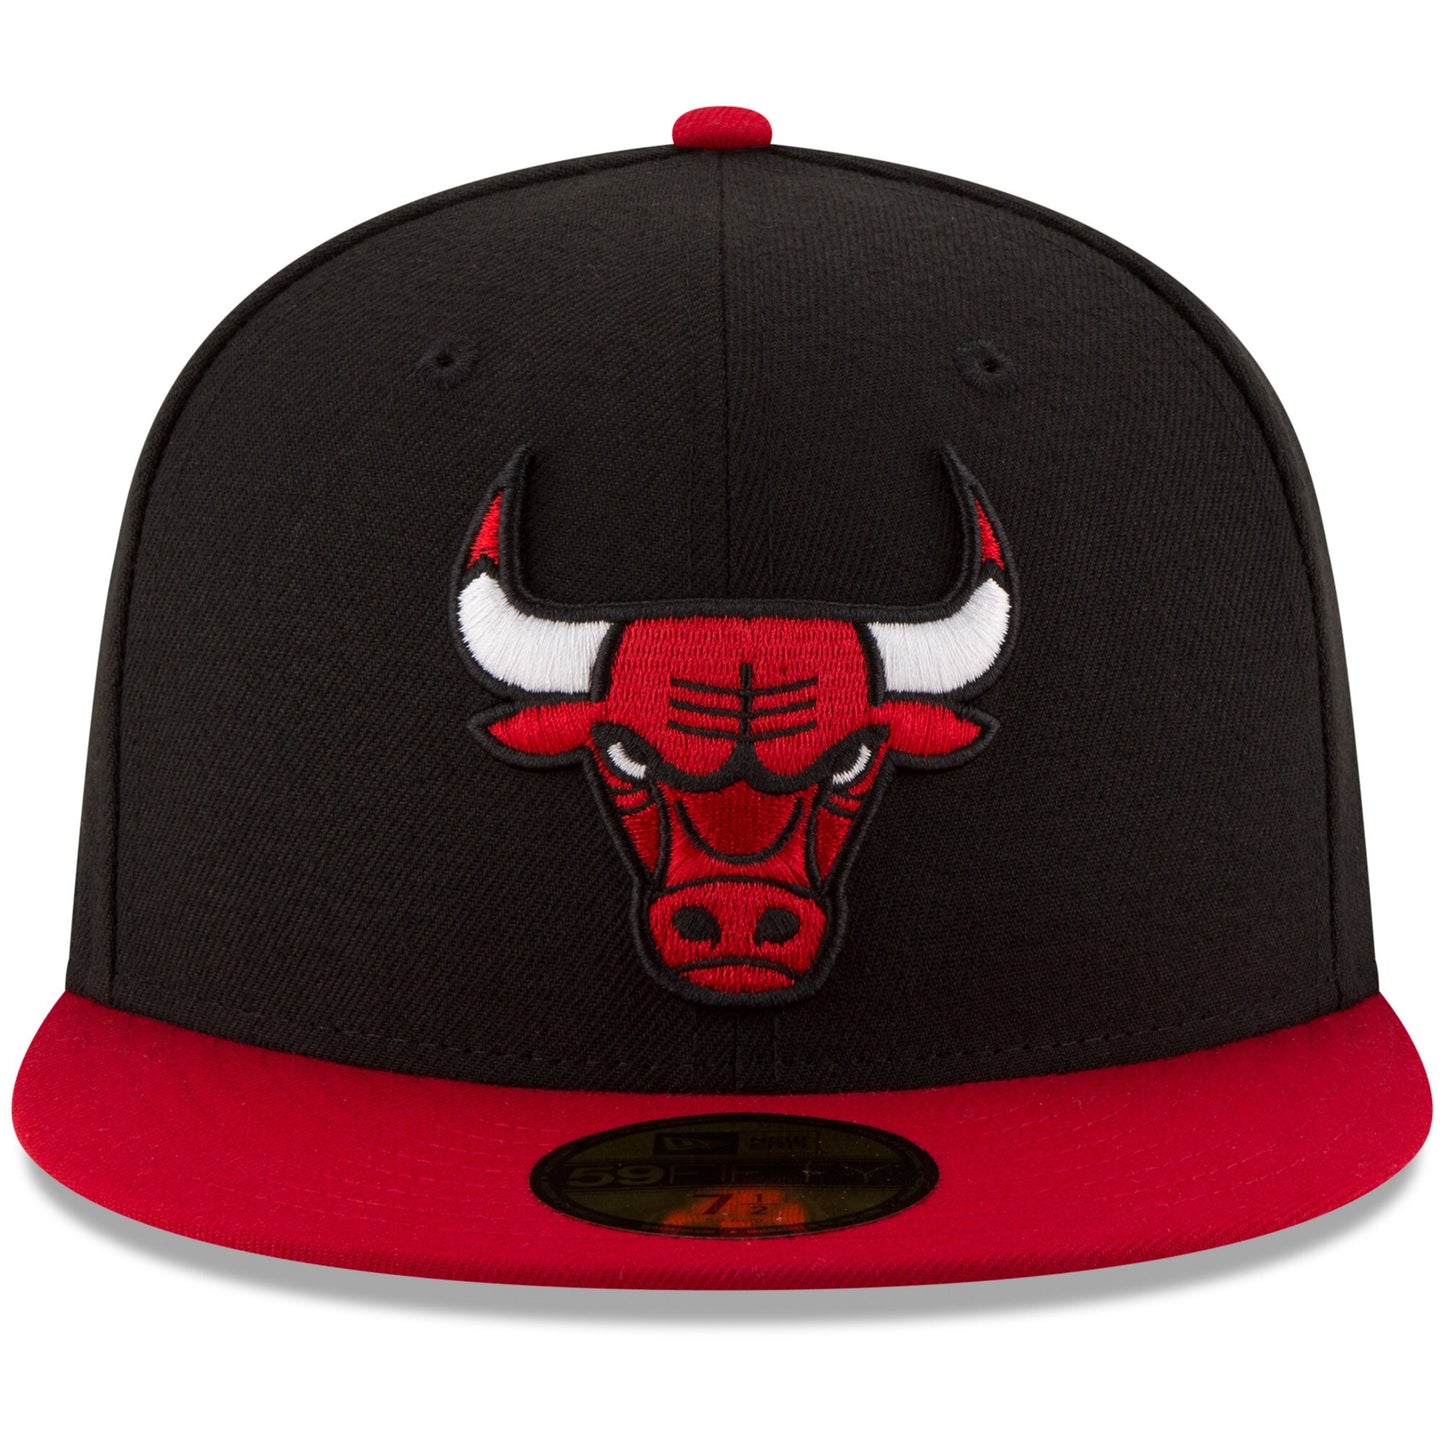 Men's Chicago Bulls New Era Black/Red Official Team Color 2Tone 59FIFTY Fitted Hat